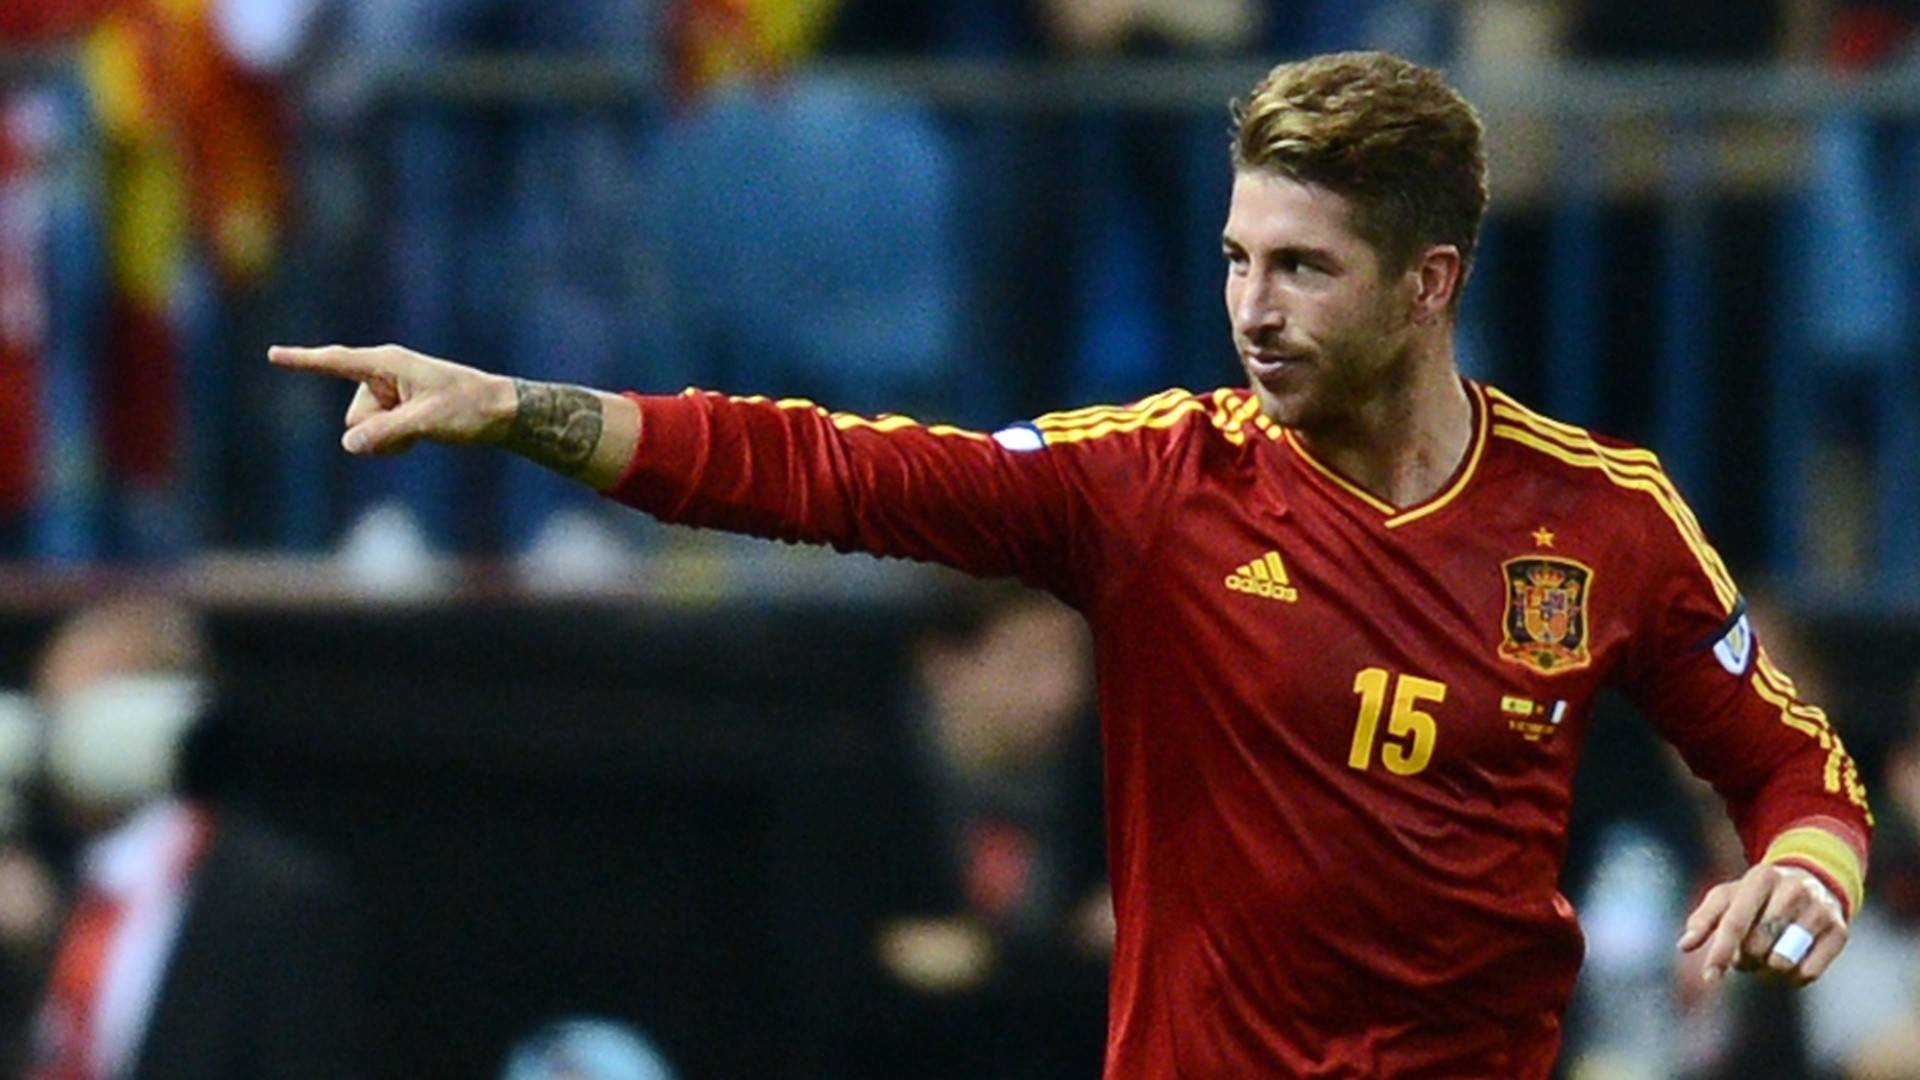 Sergio Ramos acts as lead singer for Spain&Euro 2016 song "La